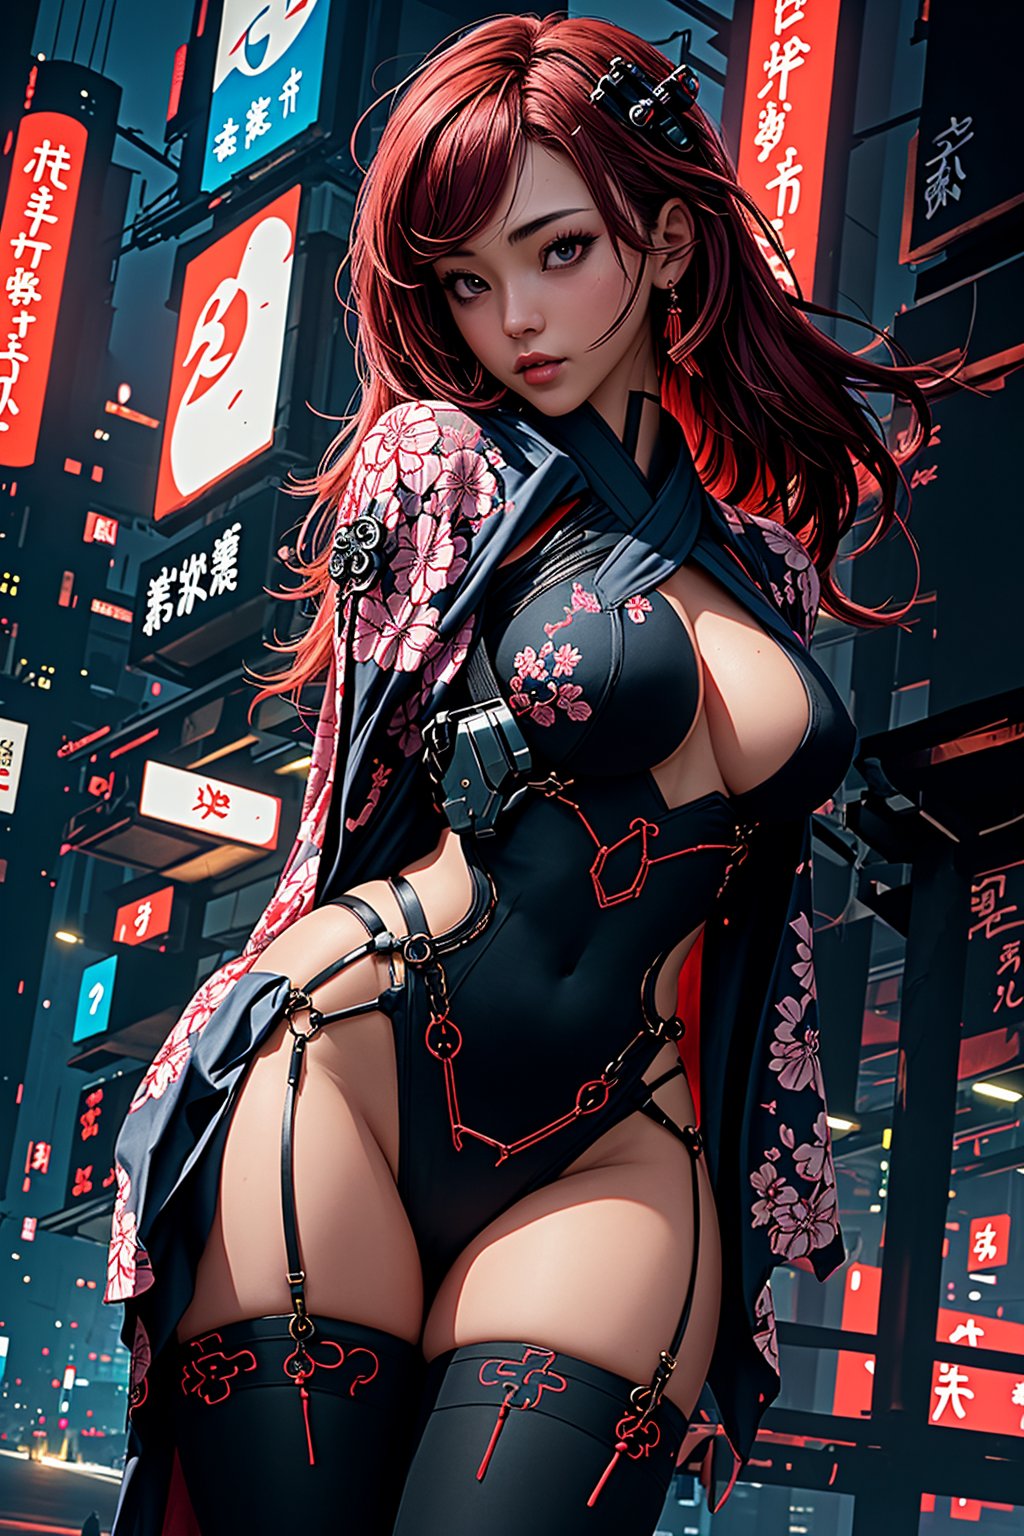 (legs opened, red long hair) masterpiece, best quality, high resolution,  female_solo , (1 sexy revealing kunoichi with perfect slender body proportion), (highly detailed beautifully colored warrior onepiece costume) , (detailed kimono obi with tassels and patterns) , (black stockings) , (pink and purple lightings in the dark night) , (full length body+Dutch angle shot), (sexy pose),  (highly detailed background of ancient Japanese achitechture + cyberpunk buildings) ,Cyberpunk,A Traditional Japanese Art,Sexy Pose,perfect fingers, cyberpunk style